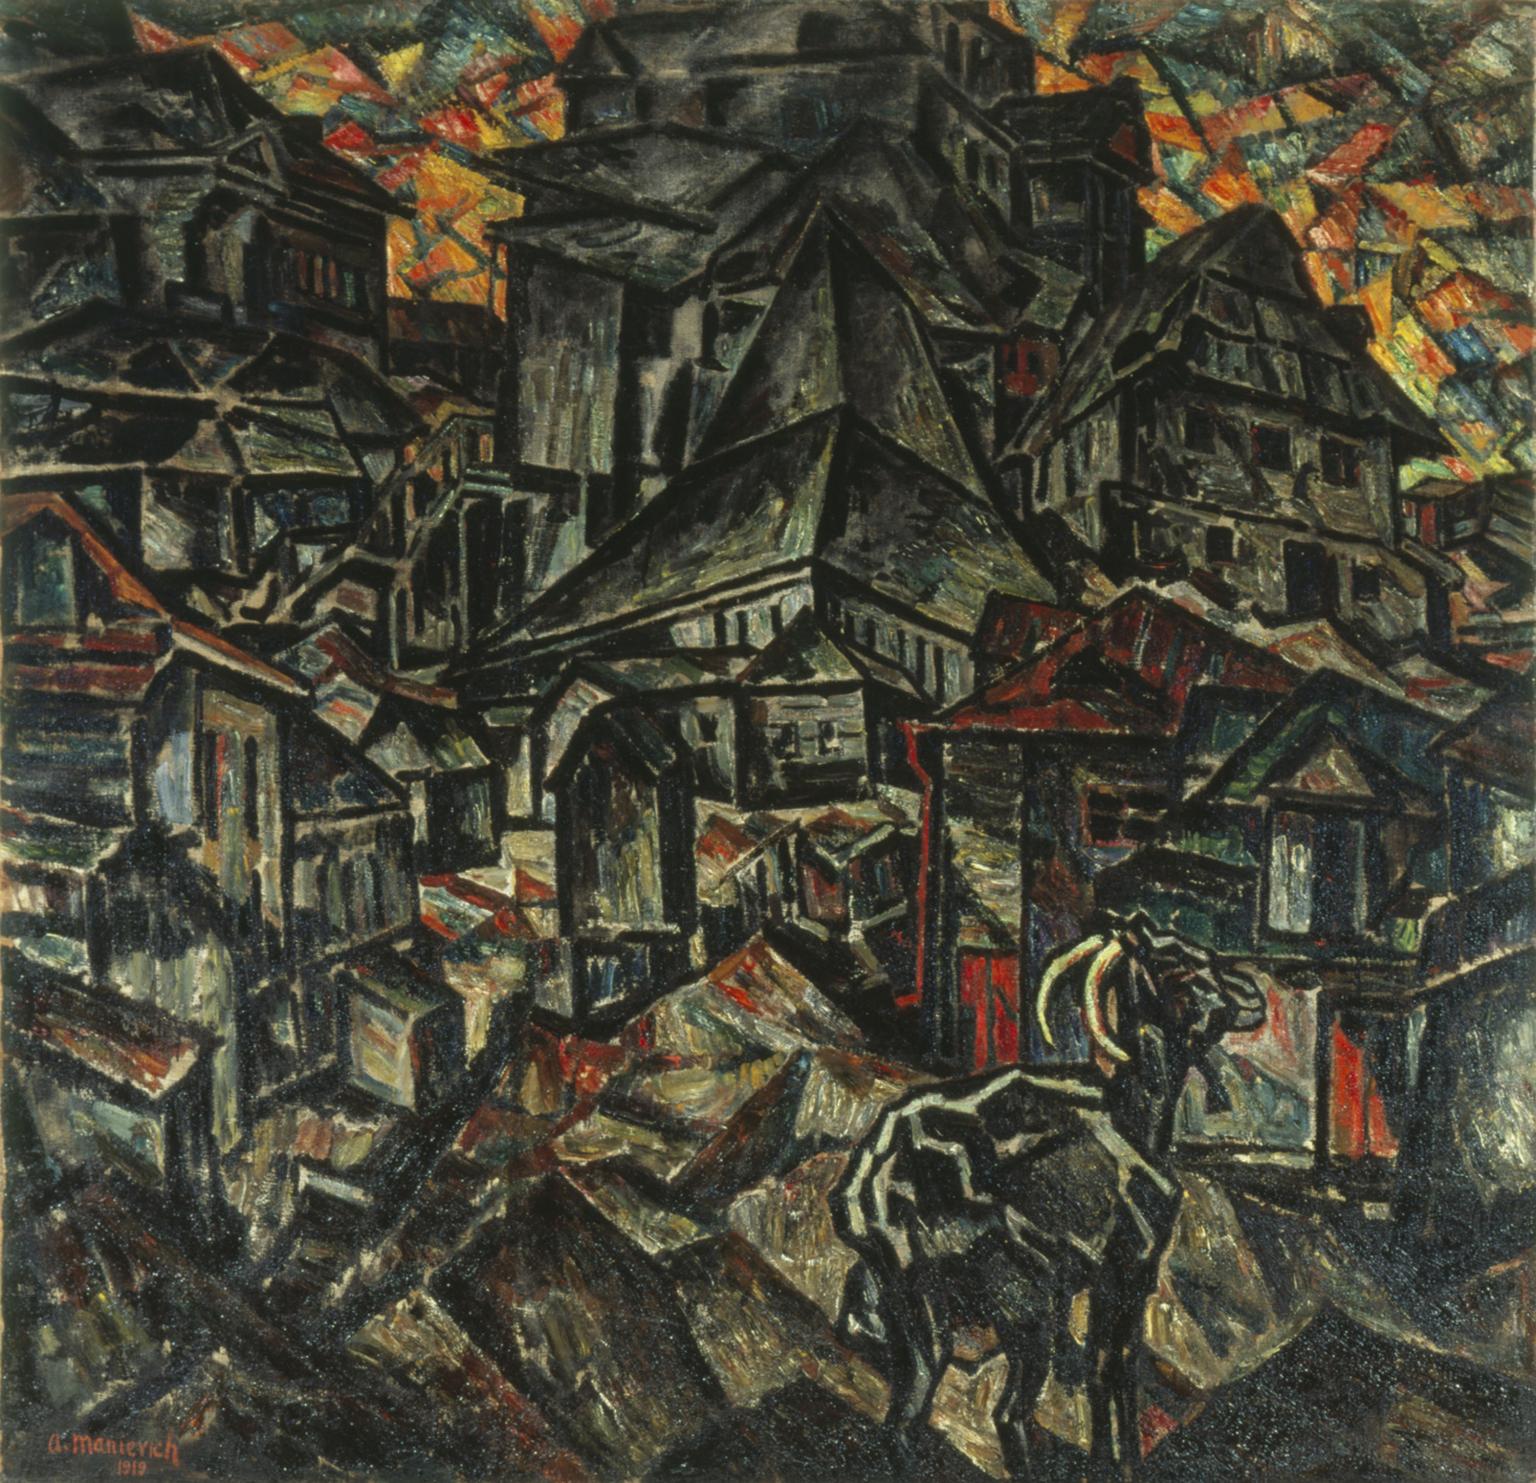 Angular painting of cityscapes with many buildings, empty streets, and goat in the foreground.